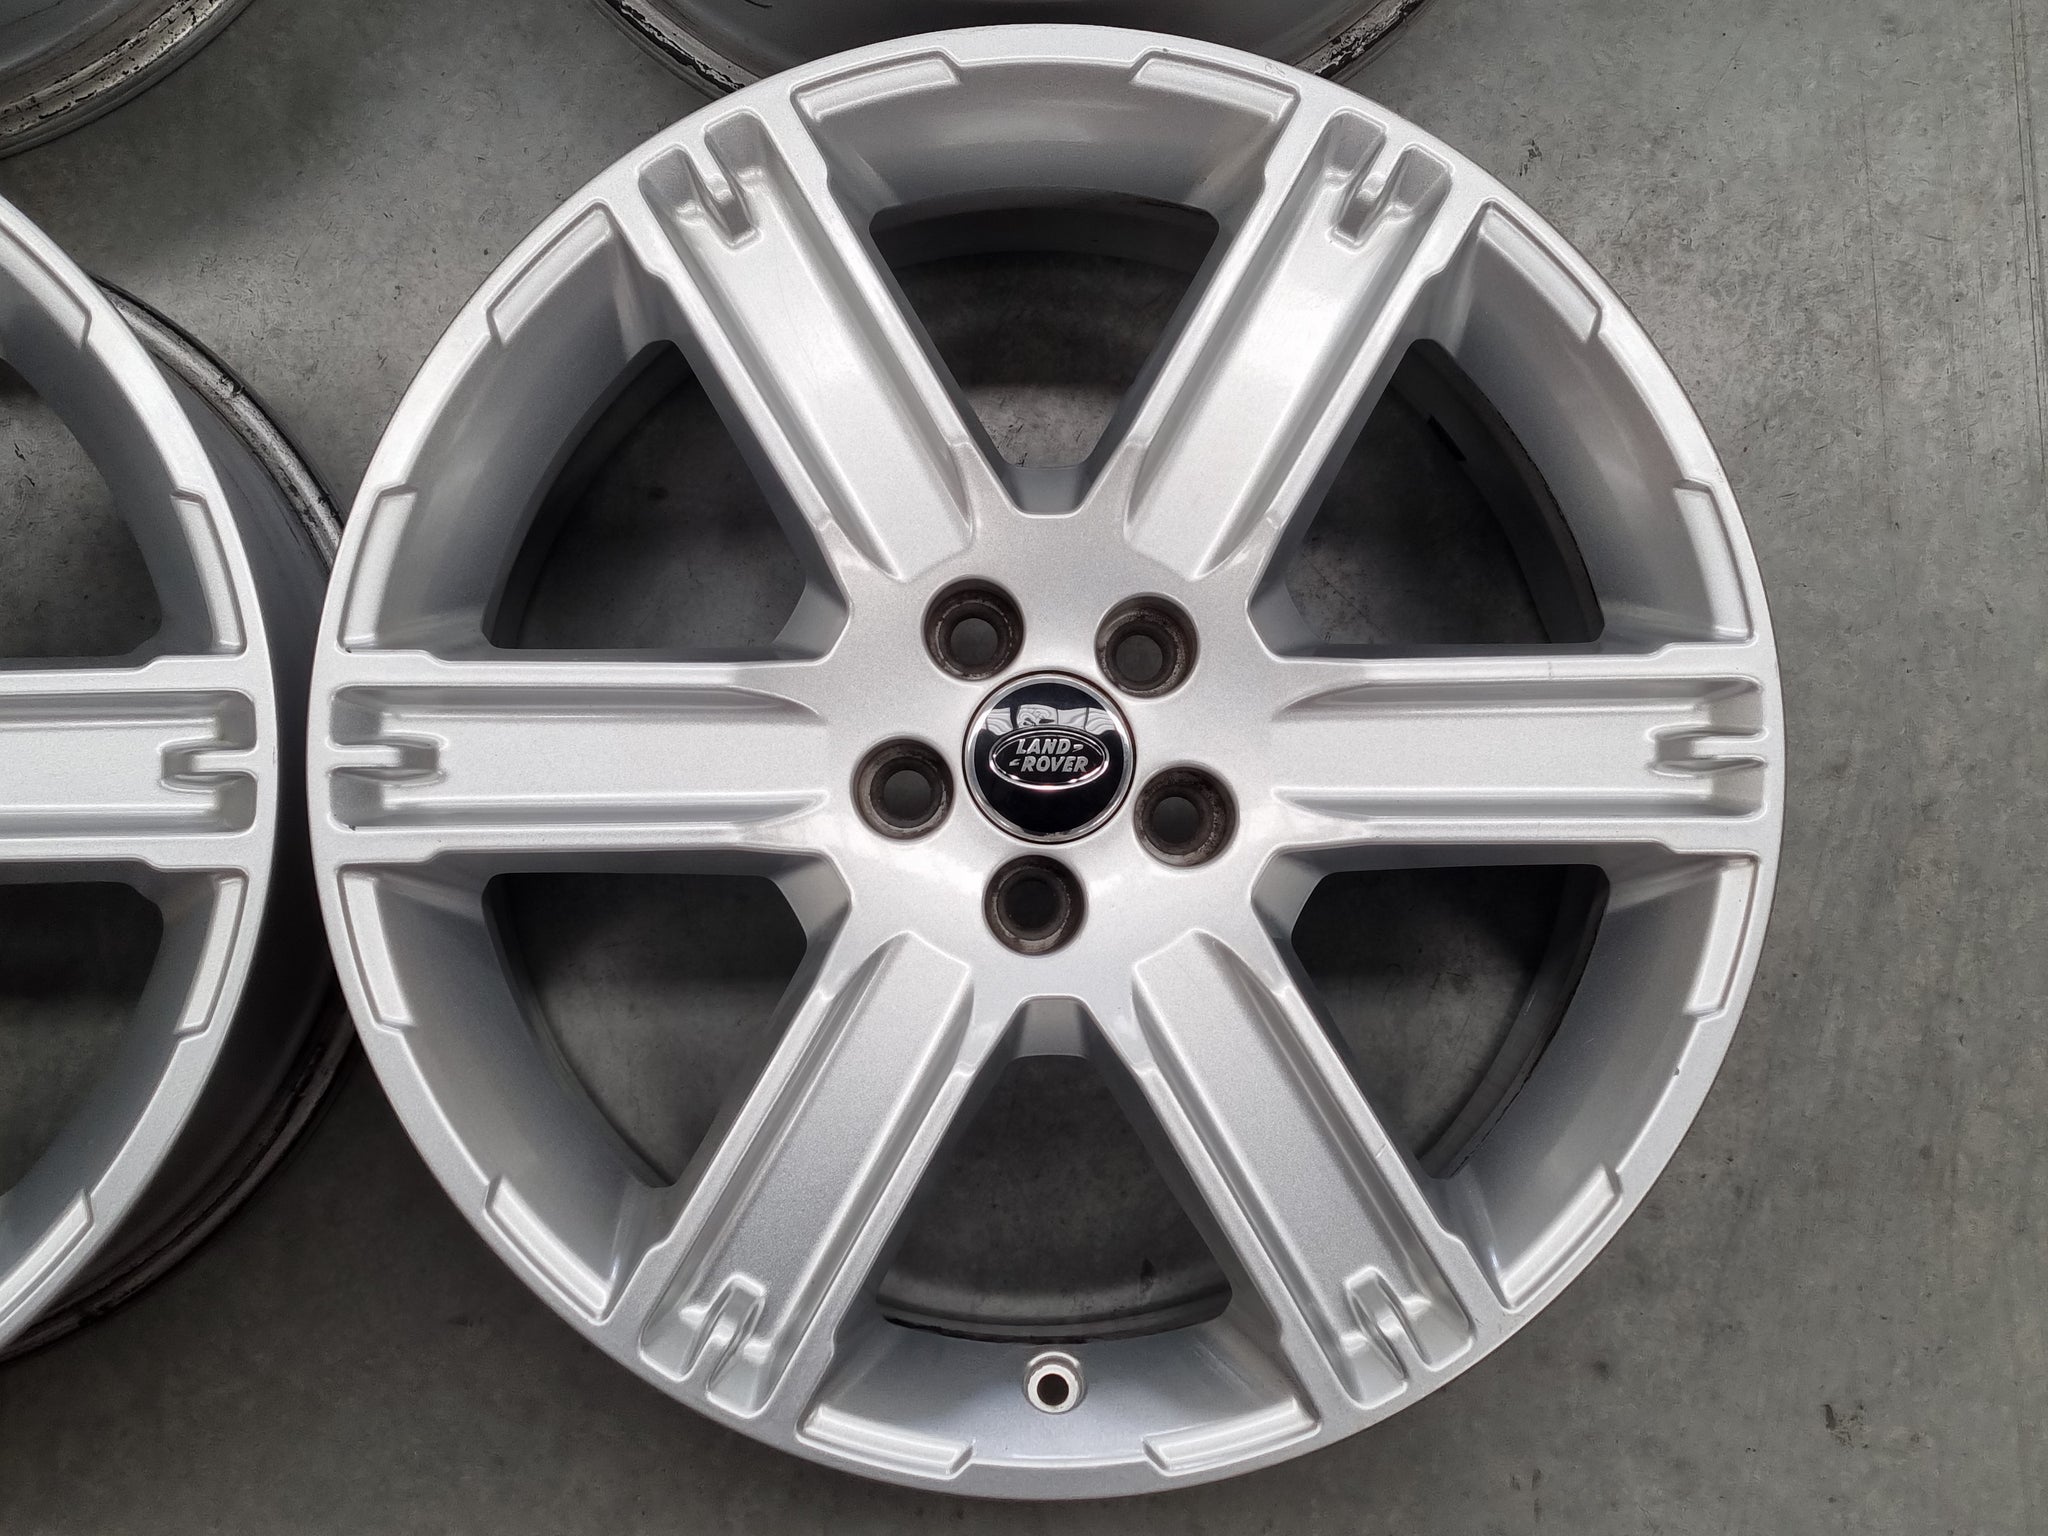 Load image into Gallery viewer, Genuine Range Rover Evoque BJ32 Silver 19 Inch Alloy Wheels Set of 4
